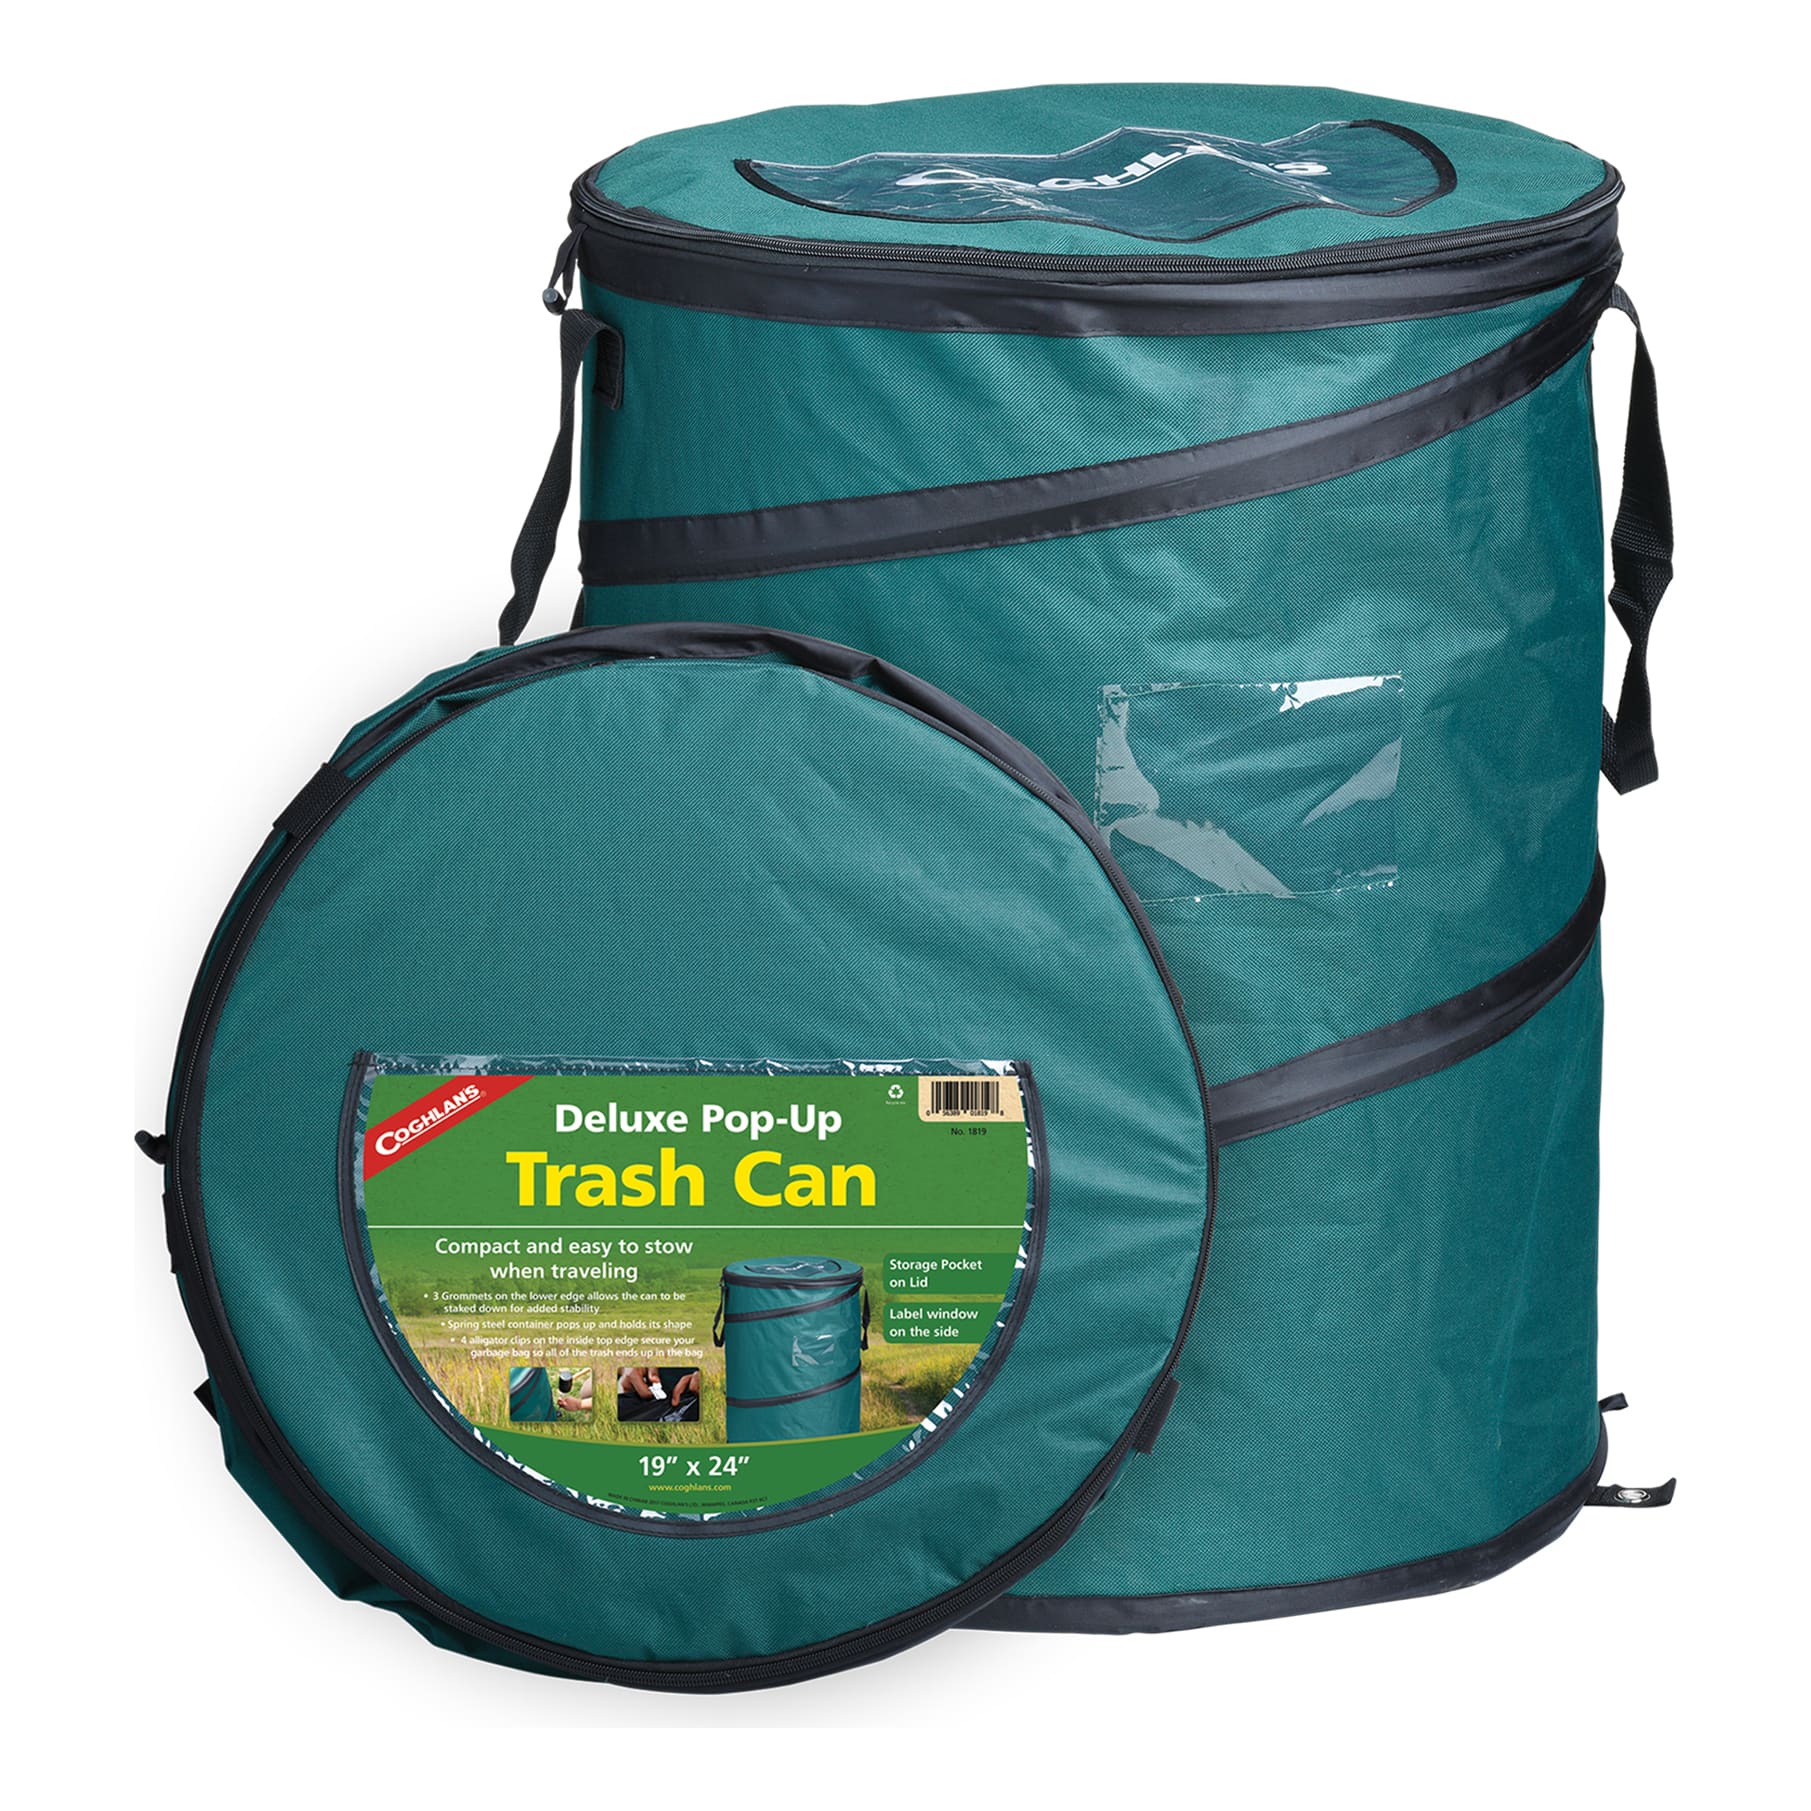 Coghlan's® Deluxe Pop-Up Trash Can